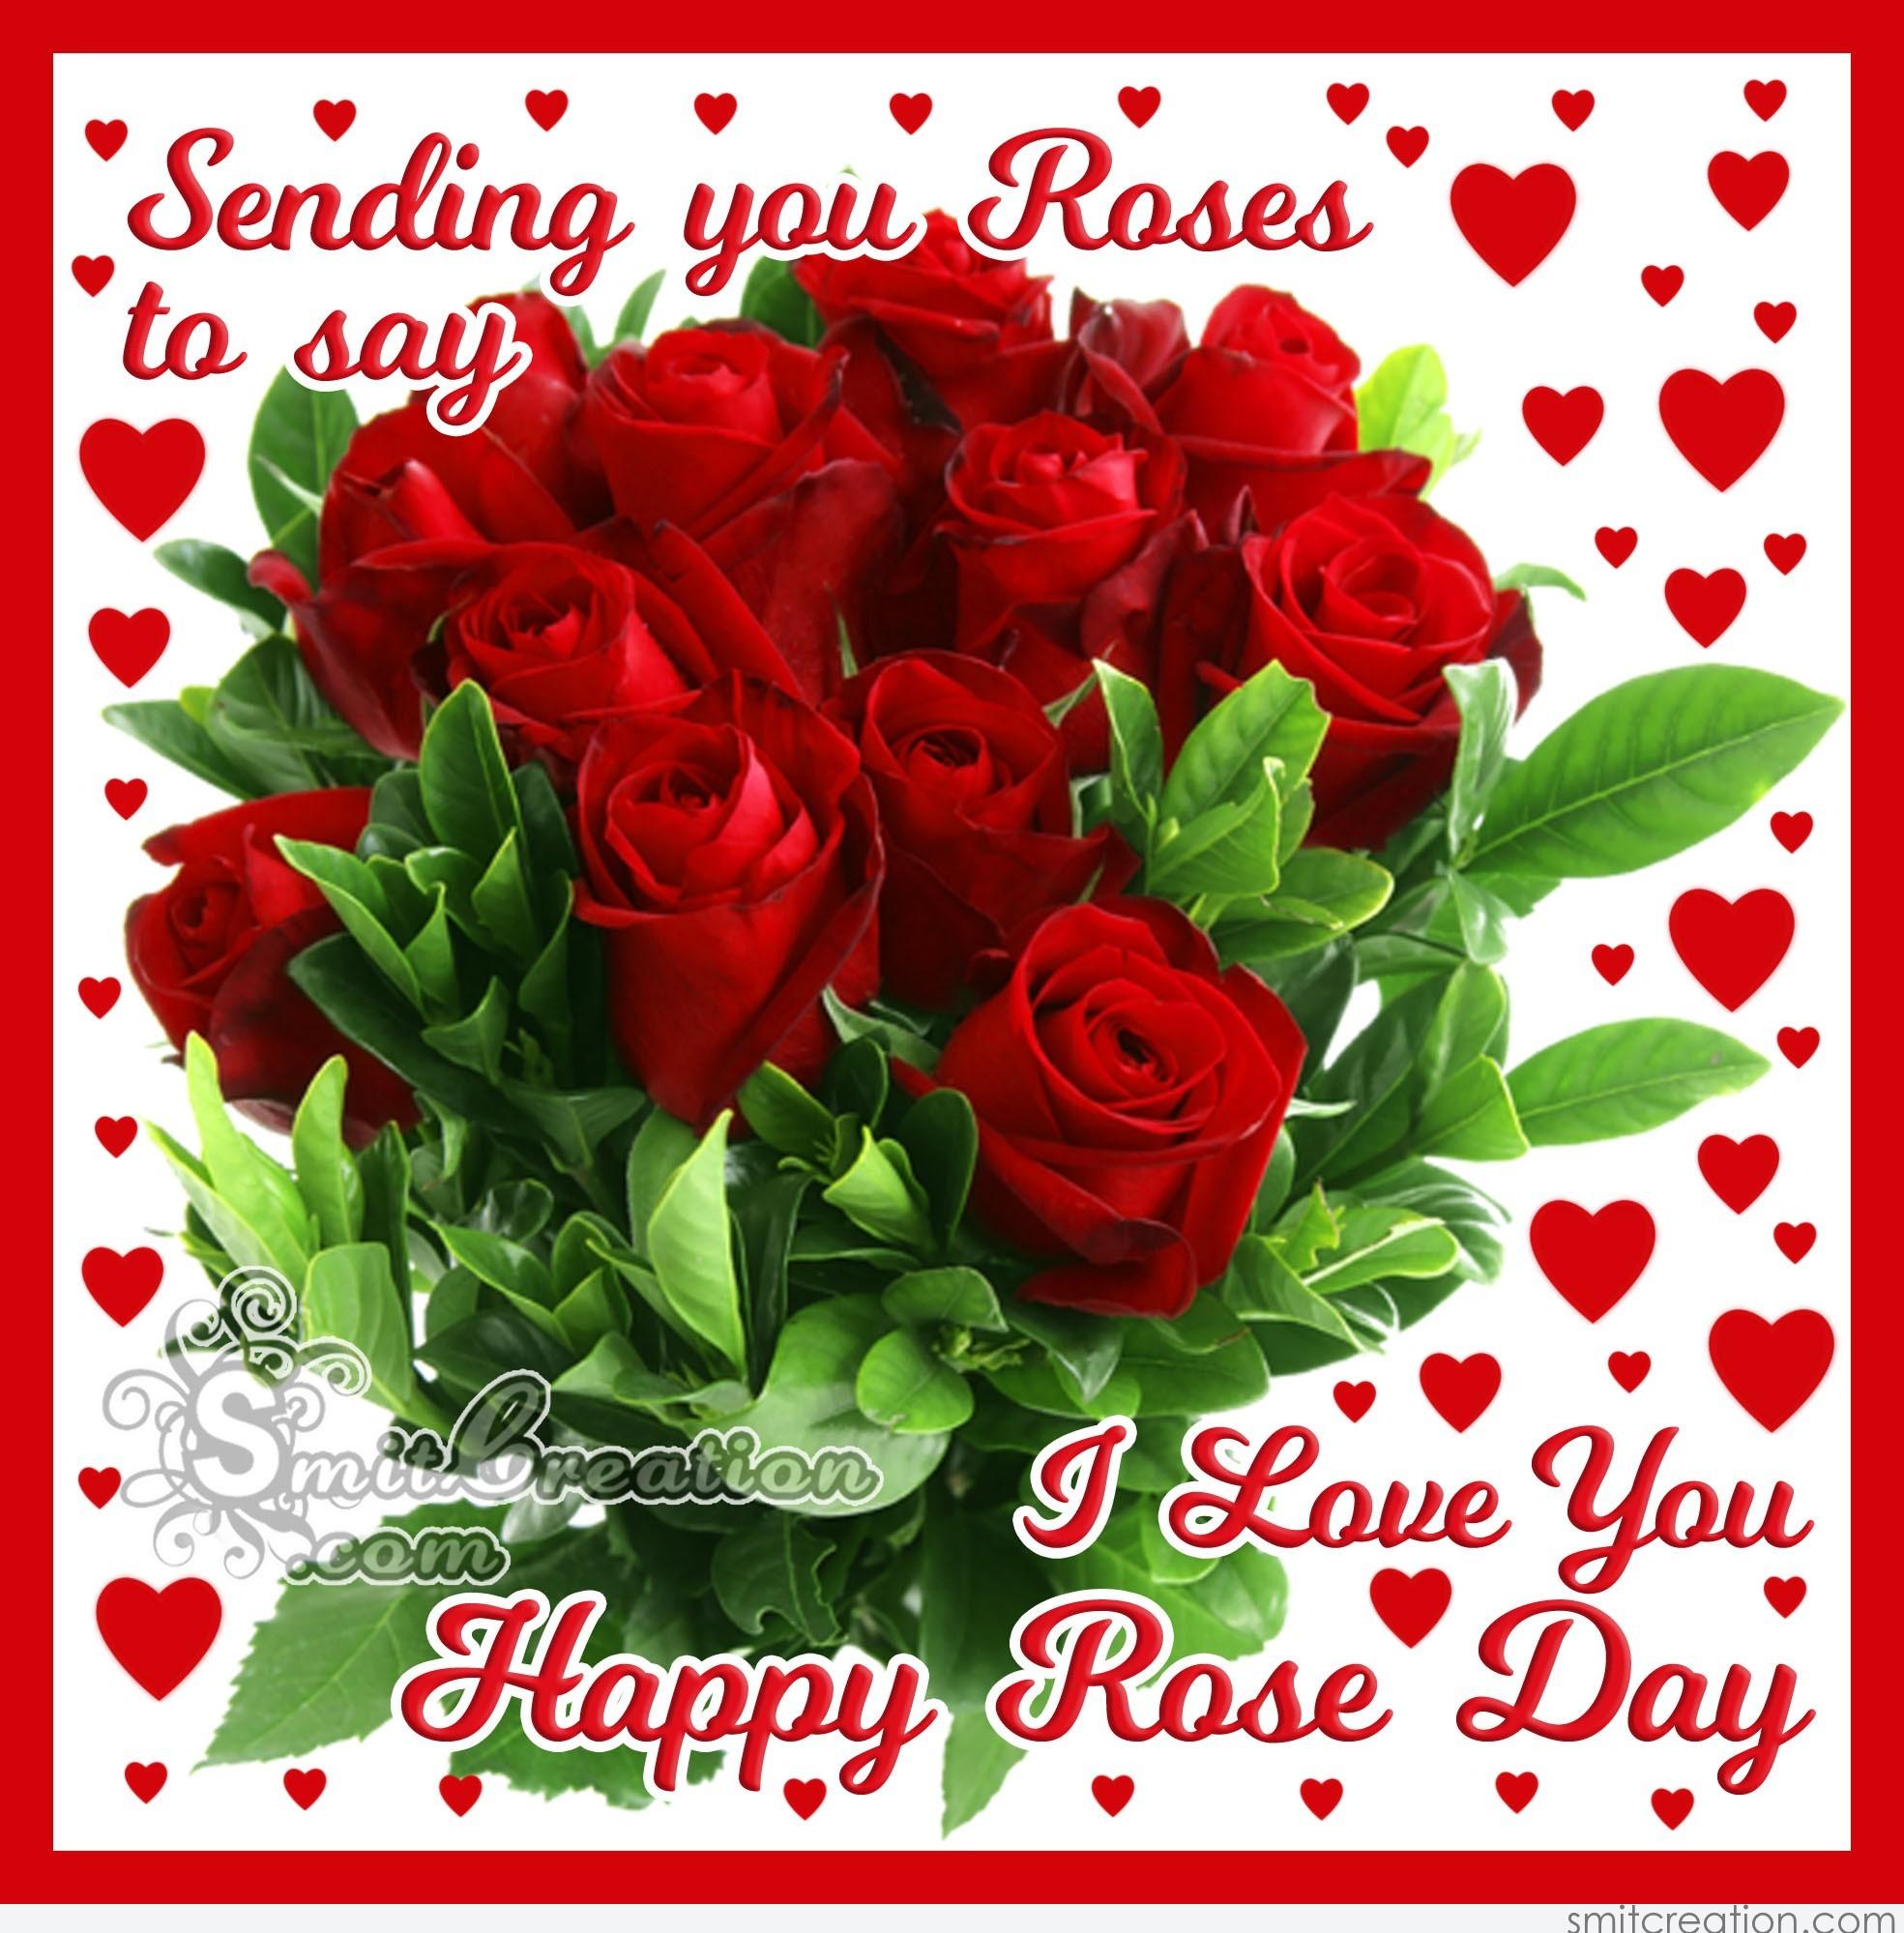 Sending you Roses to say I Love You Happy Rose Day